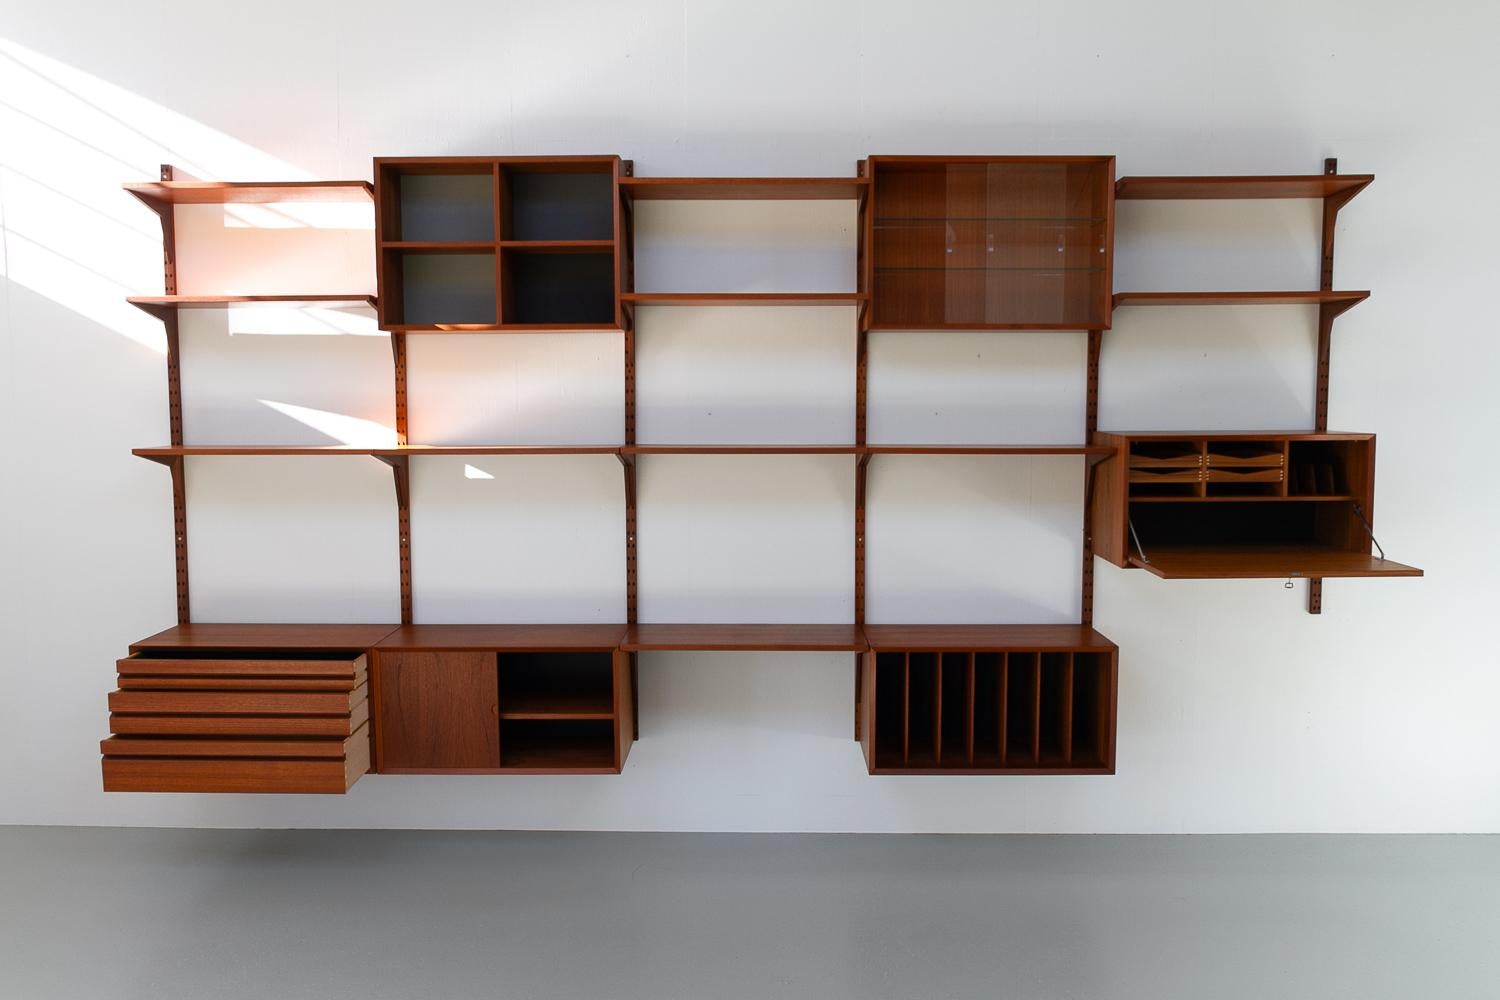 Vintage Danish Modular Teak Wall Unit by Poul Cadovius for Cado, 1960s.

Mid-Century Modern 5 bay shelving system model Cado. This is a original vintage floating bookcase designed by Danish architect Poul Cadovius. 
Cadovius had the revolutionary